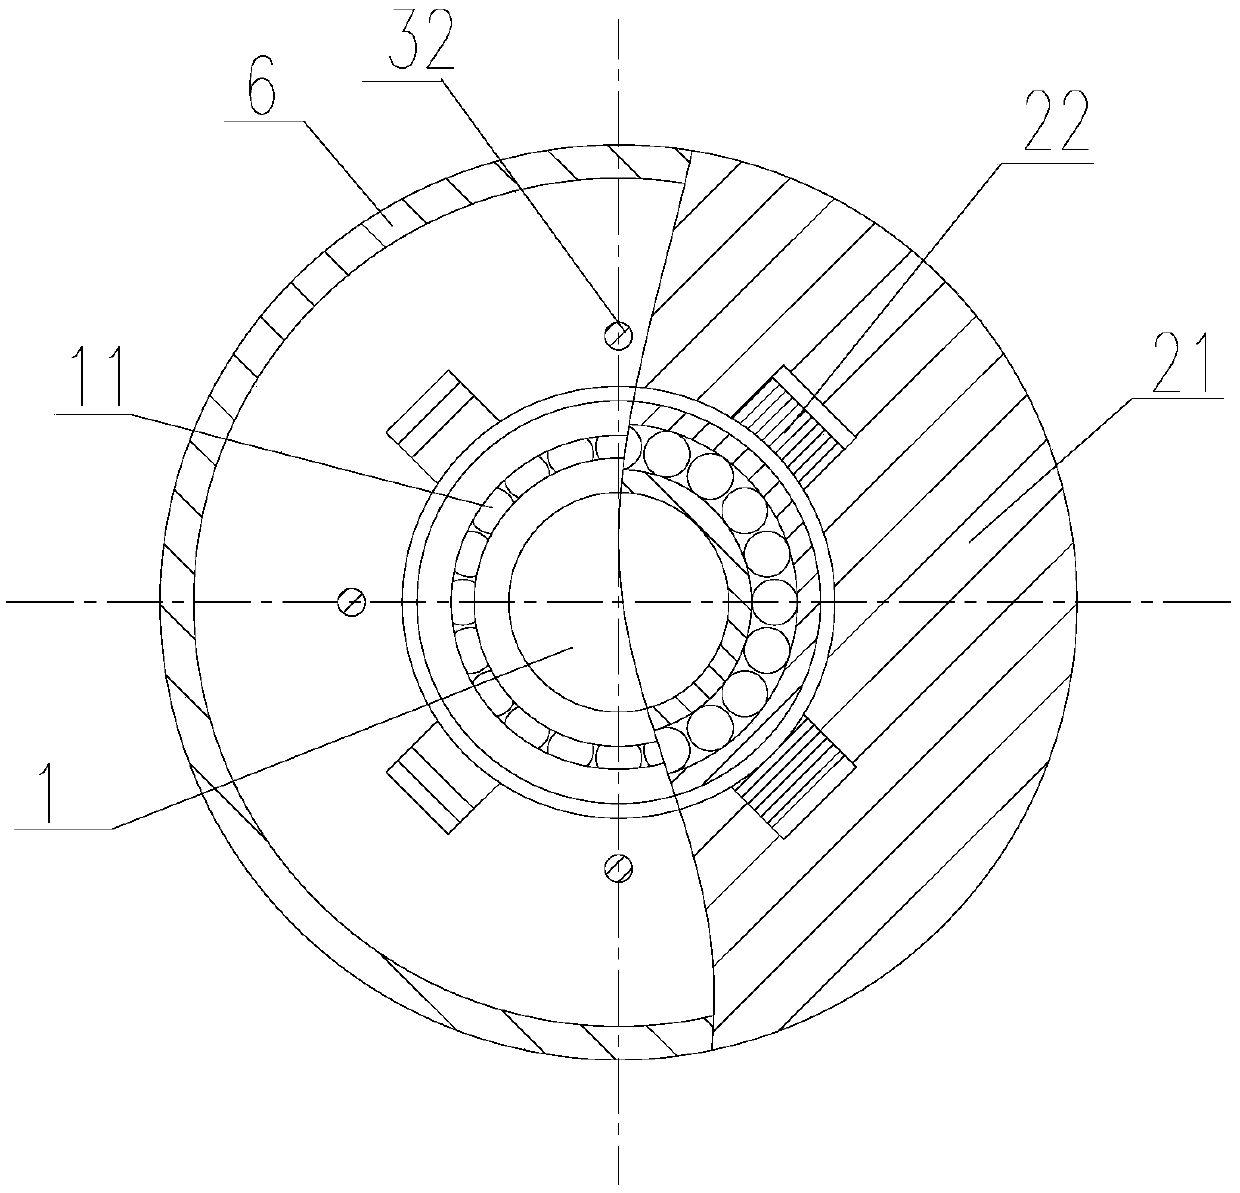 Bearing protection device capable of adjusting bearing outer ring gap